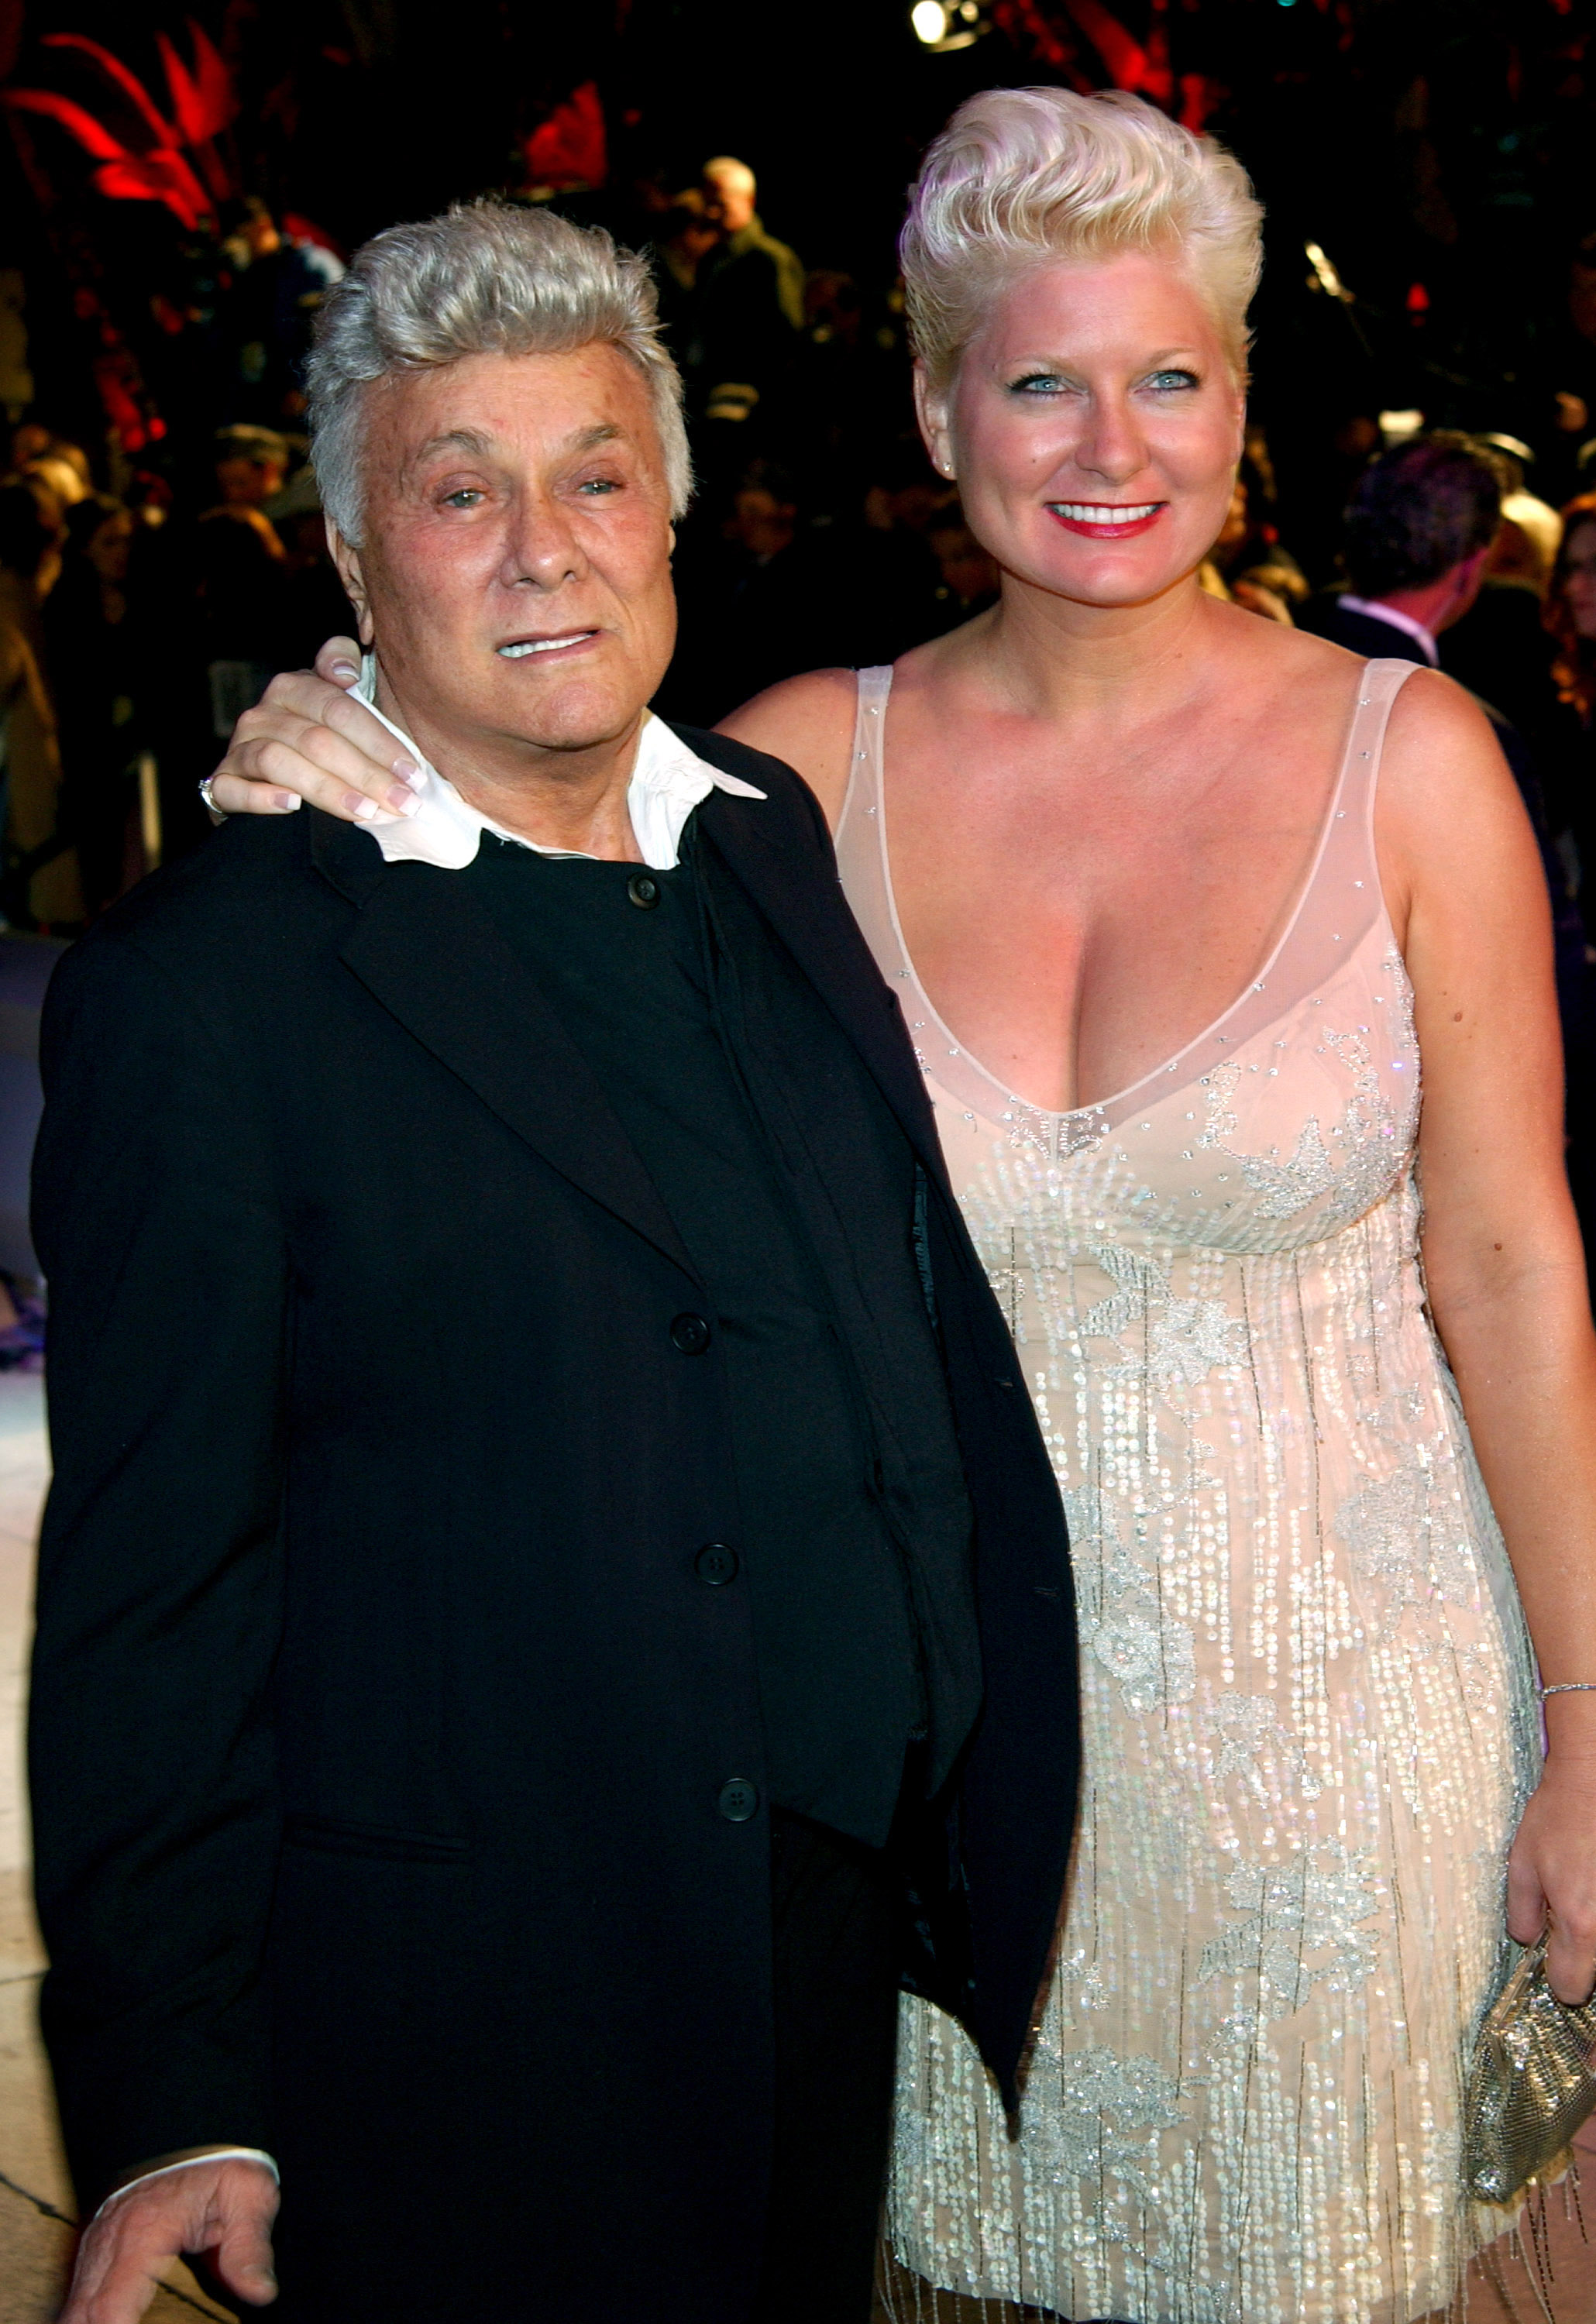 Tony Curtis and wife Jill Vandenberg during 2004 Vanity Fair Oscar Party at Mortons in Beverly Hills, California, United States. | Source: Getty Images